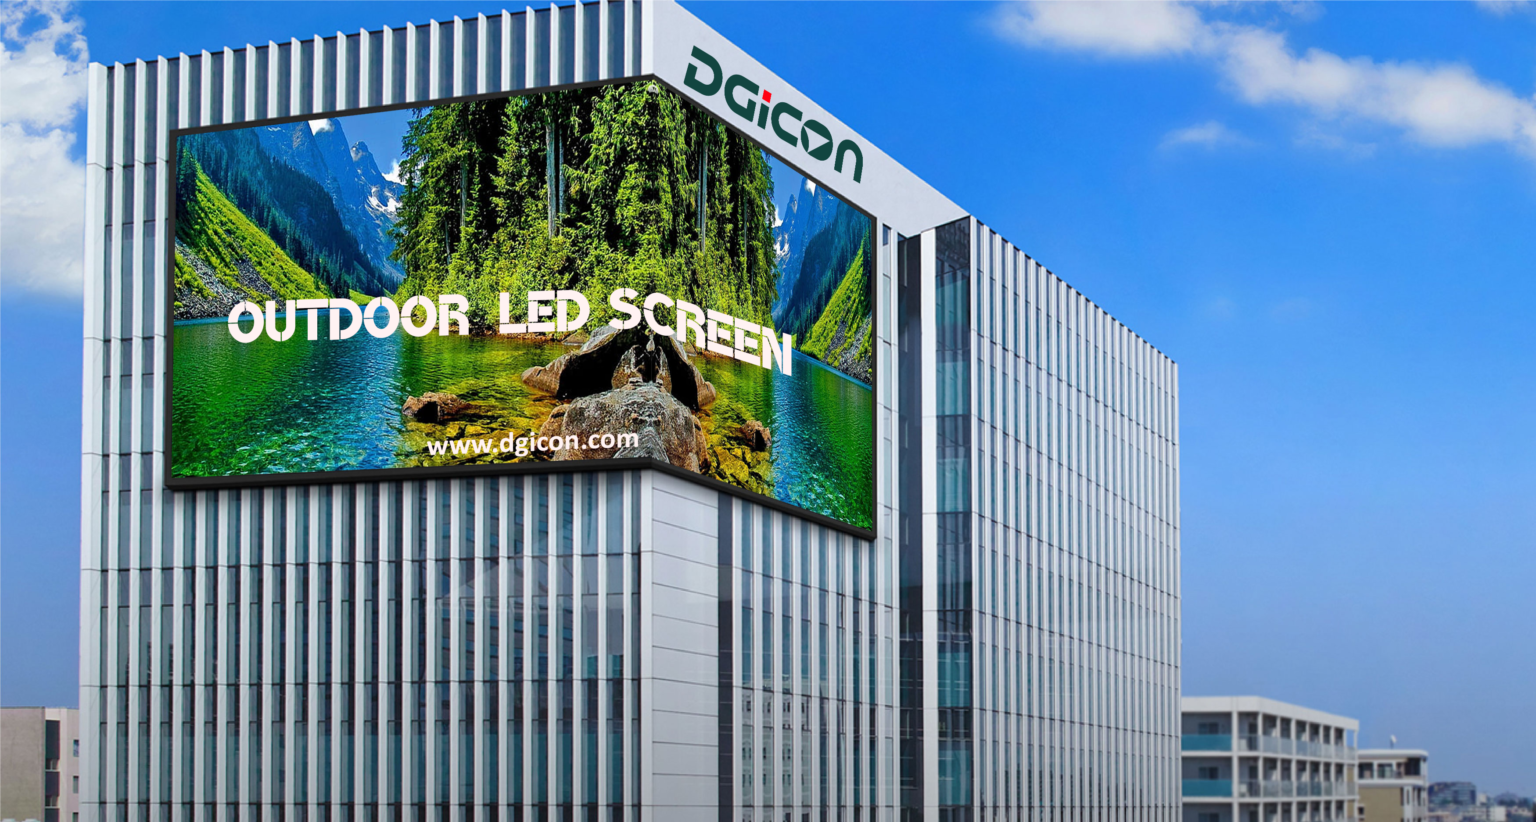 it shows outdoor LED screen